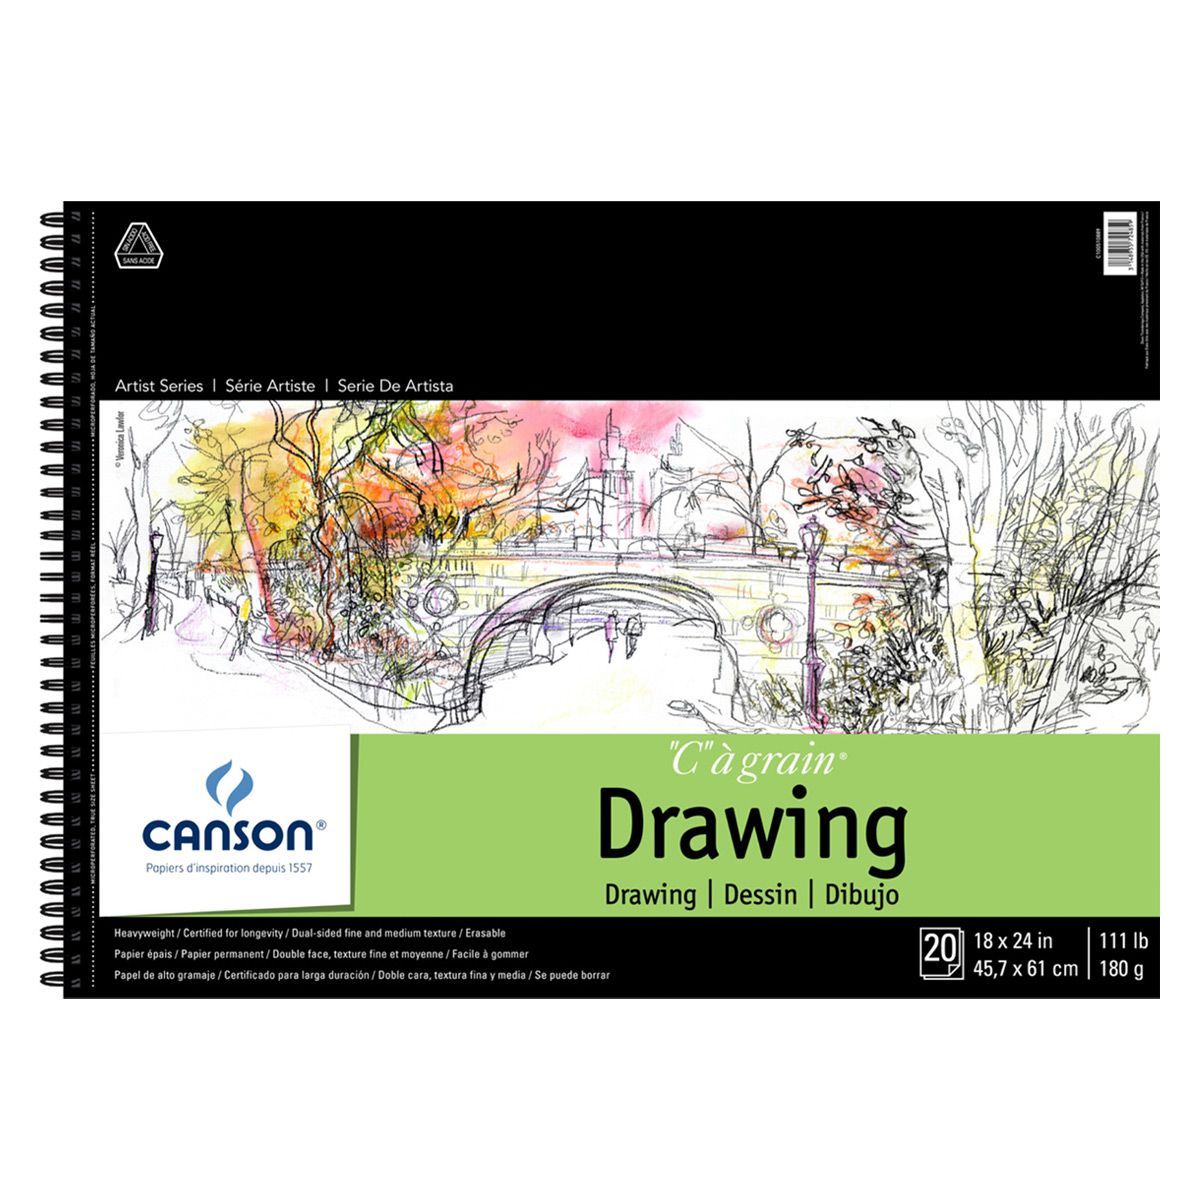 Canson C' A Grain Drawing Pads - 18"x24"